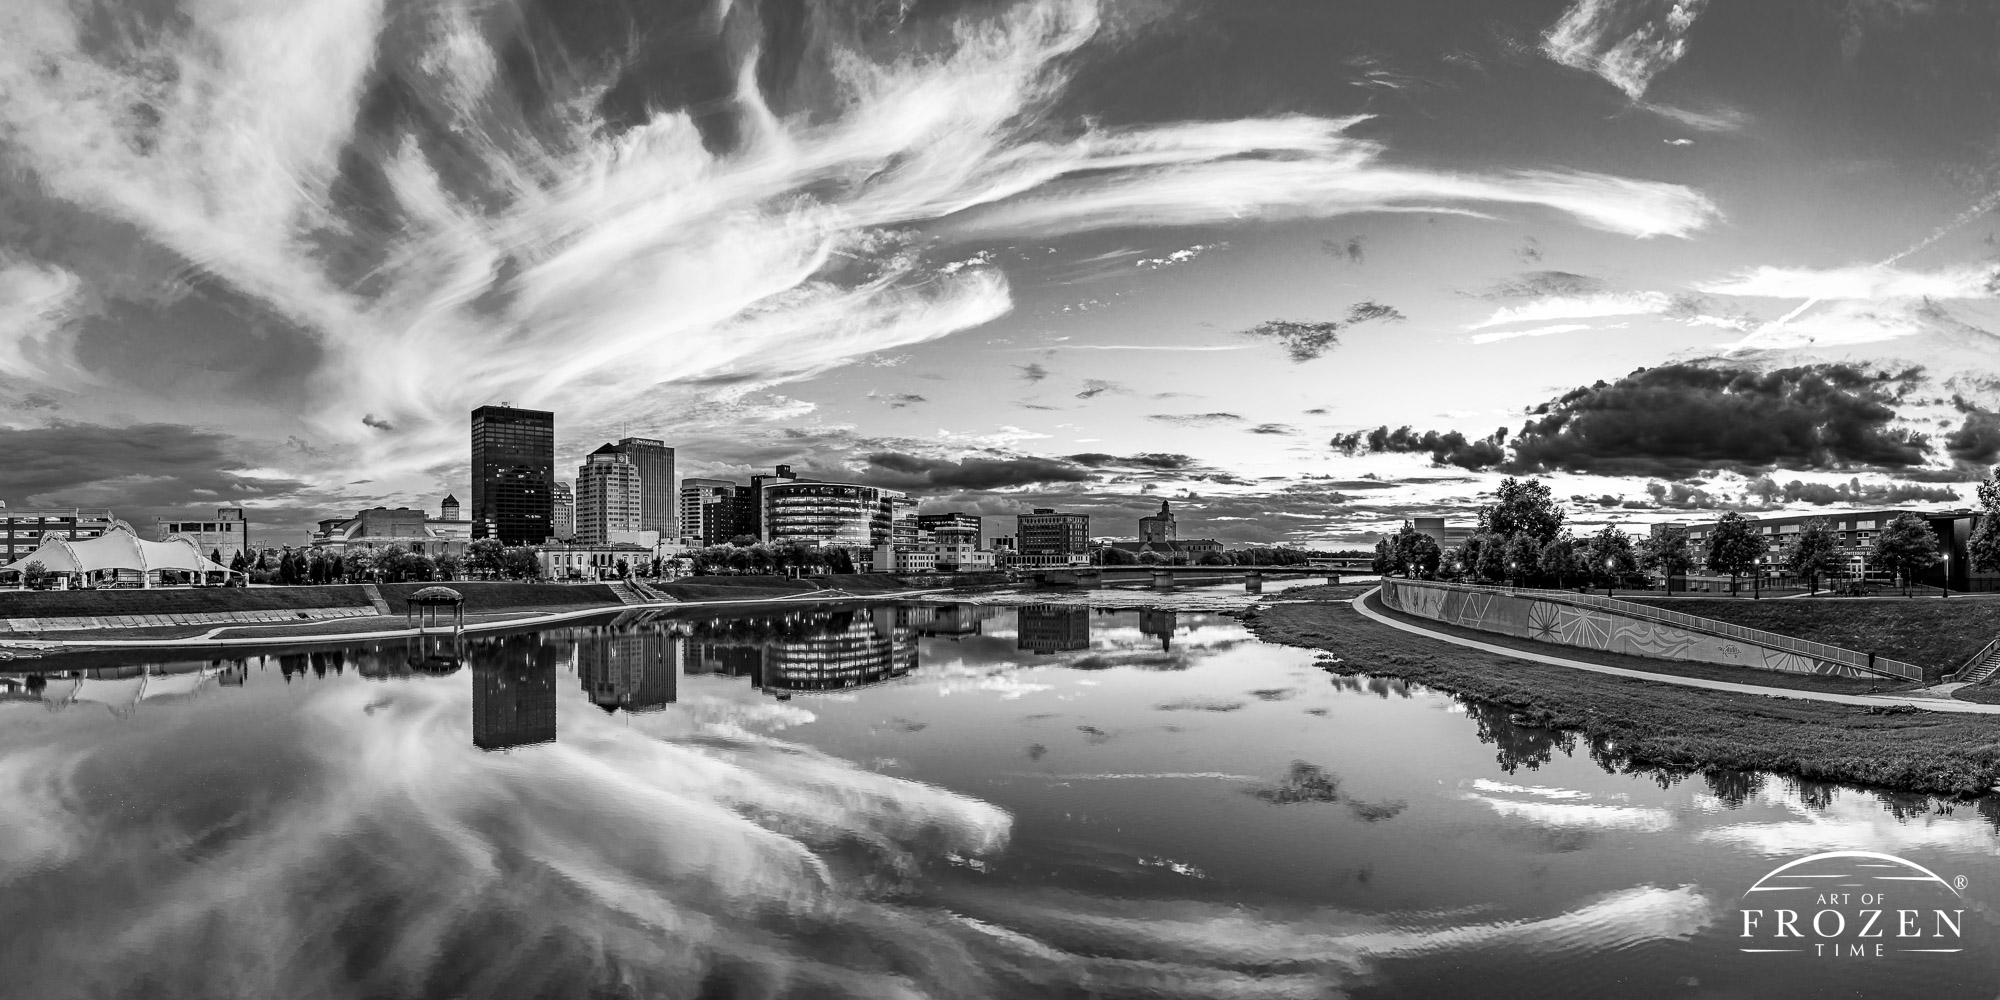 Black and white print of the Dayton Ohio Skyline where cirrus clouds remain illuminated as the sun sets over the Miami Valley